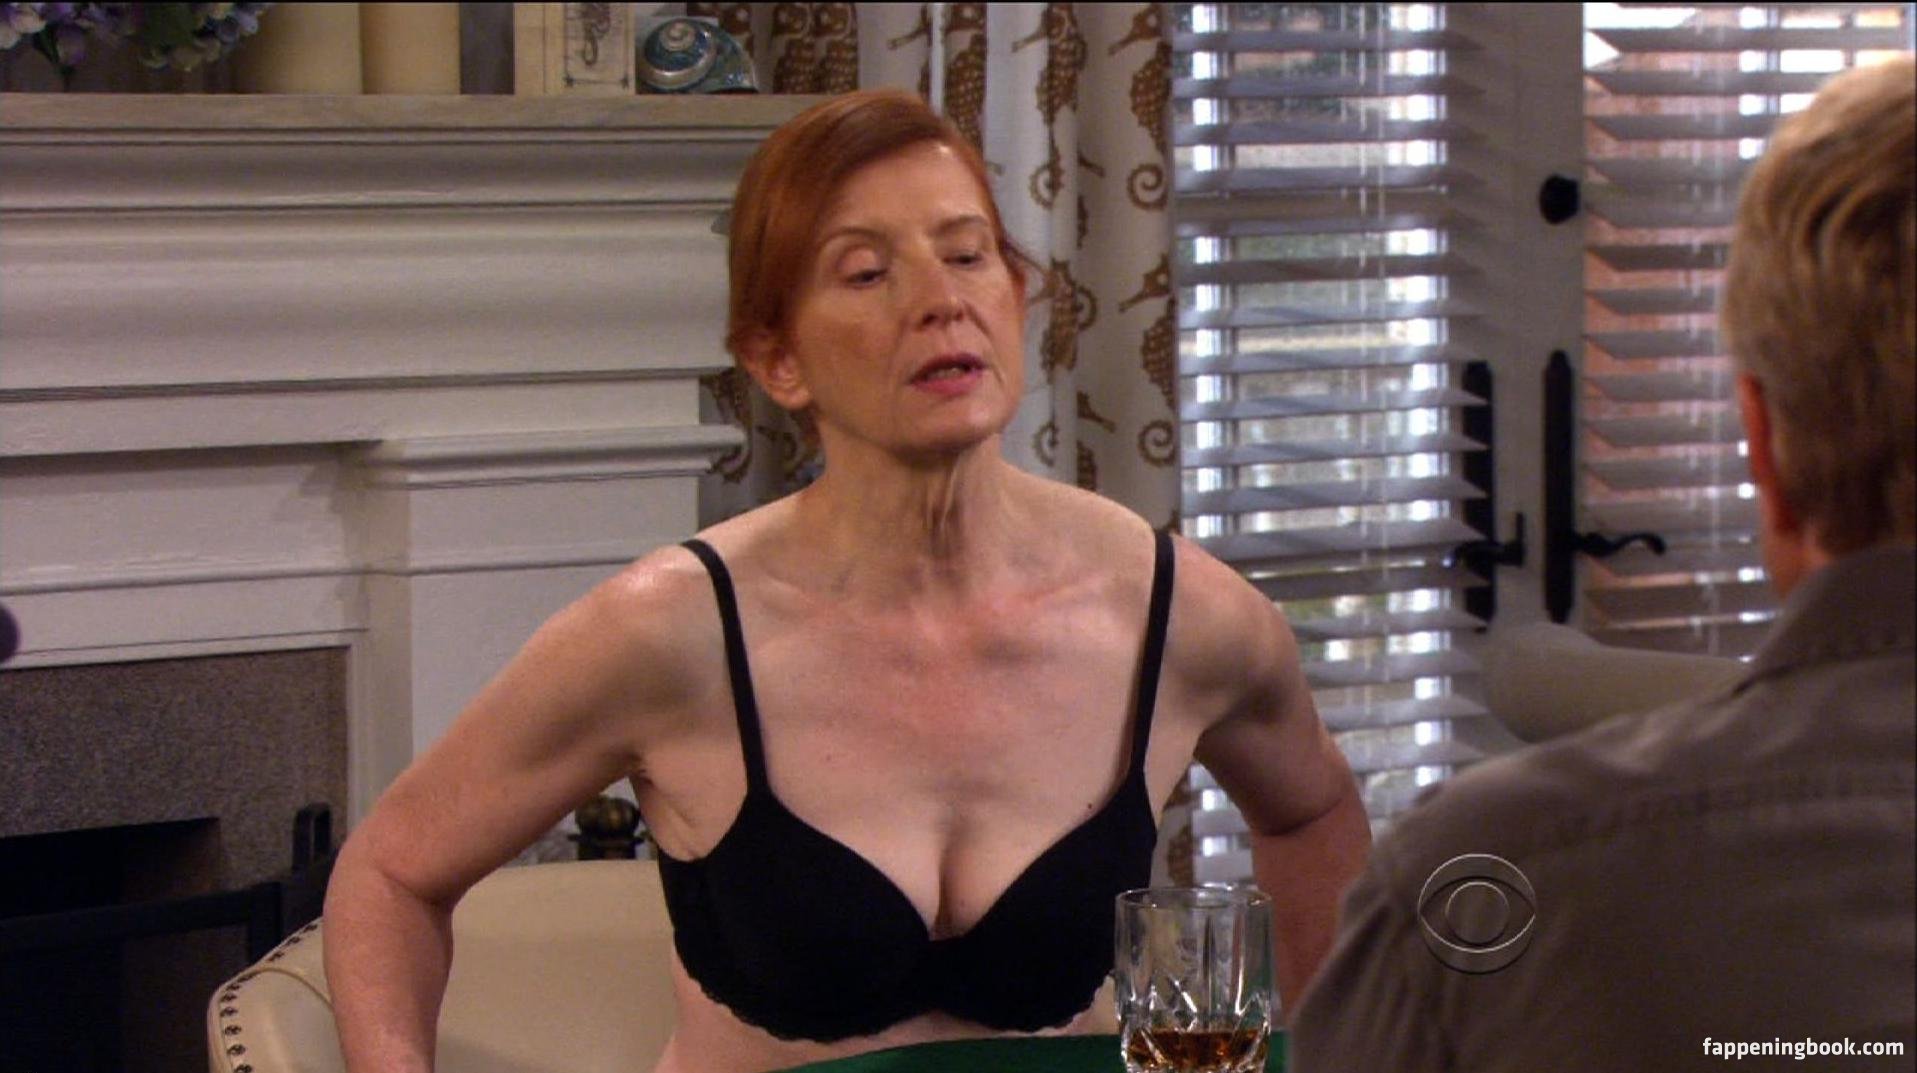 Frances Conroy Nude, The Fappening - Photo #191767 - FappeningBook.